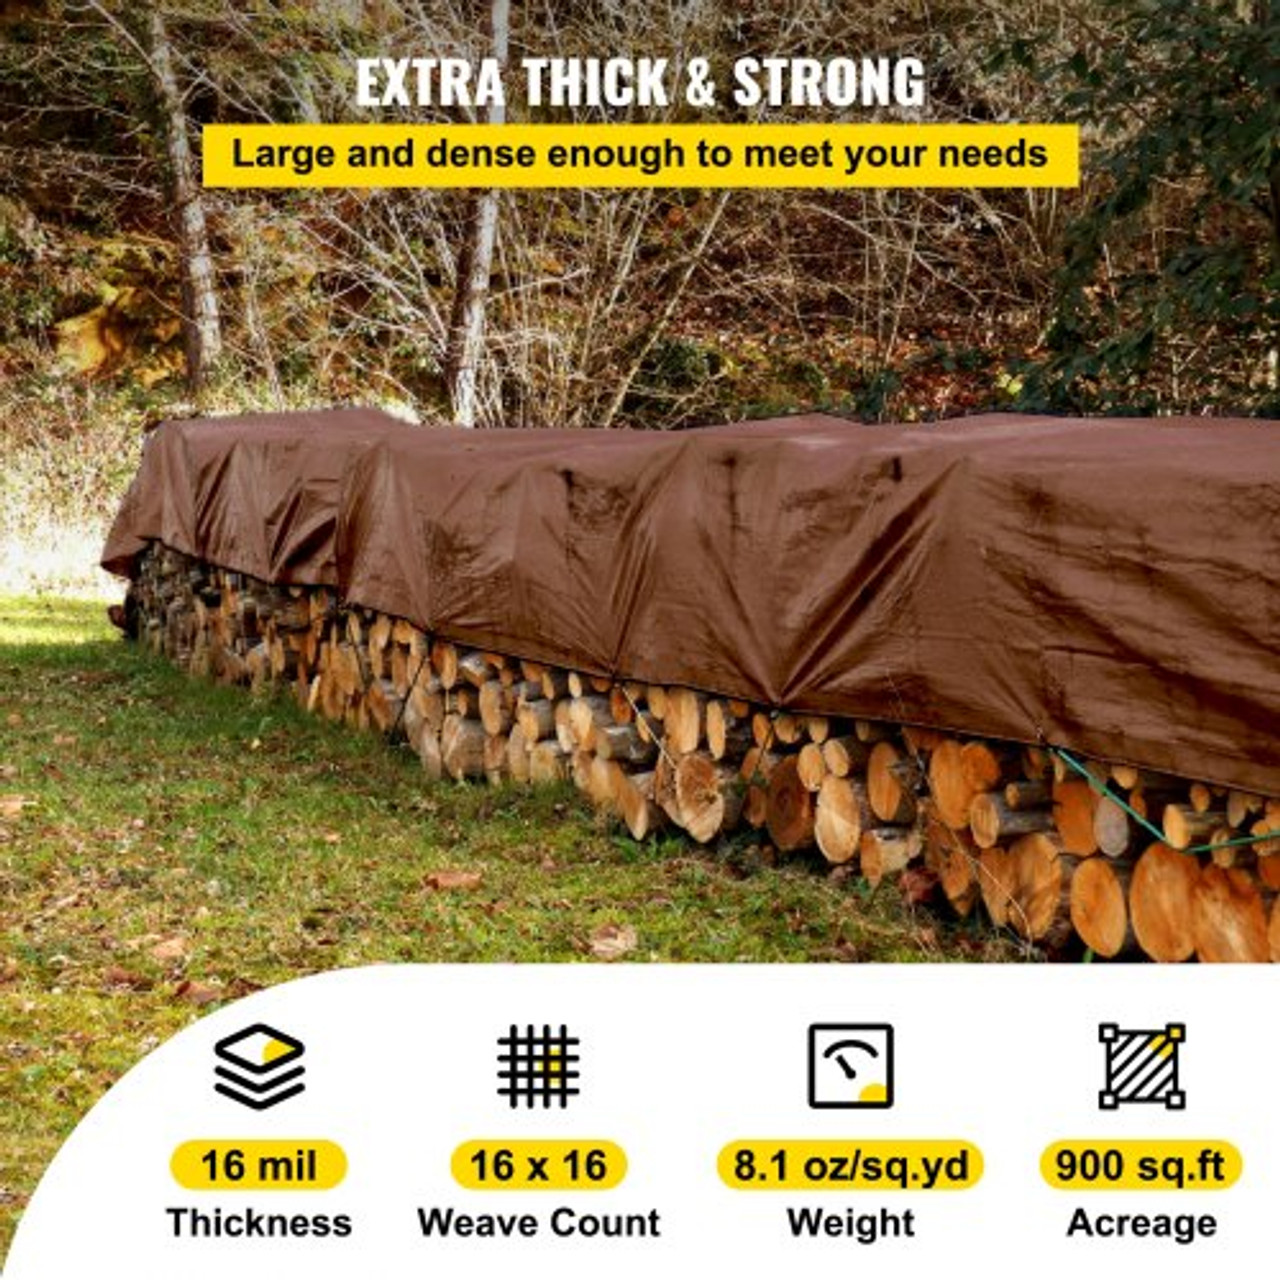 Heavy Duty Tarp, 30 x 30 ft 16 Mil Thick, Waterproof & Sunproof Outdoor Cover, Rip and Tear Proof PE Tarpaulin with Grommets and Reinforced Edges for Truck, RV, Boat, Roof, Tent, Camping, Brown